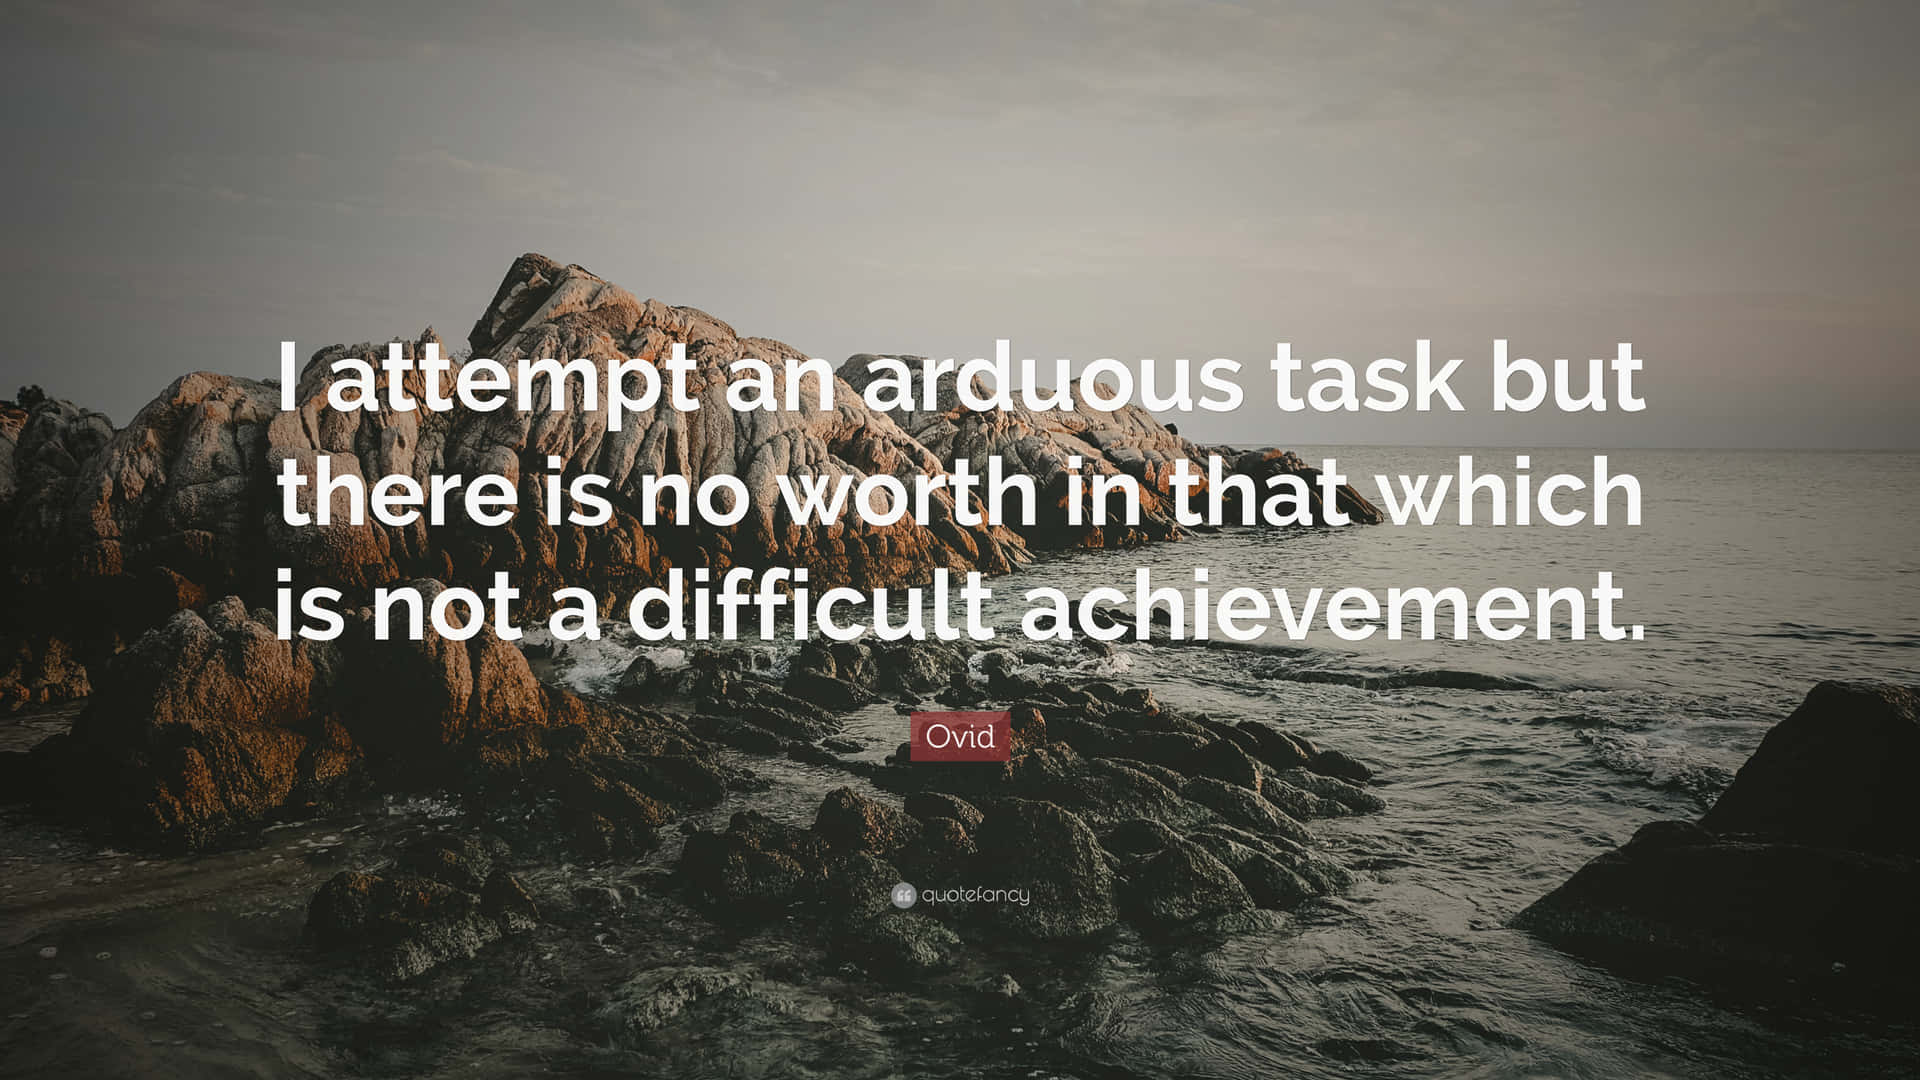 Quote On Arduous Tasks Wallpaper